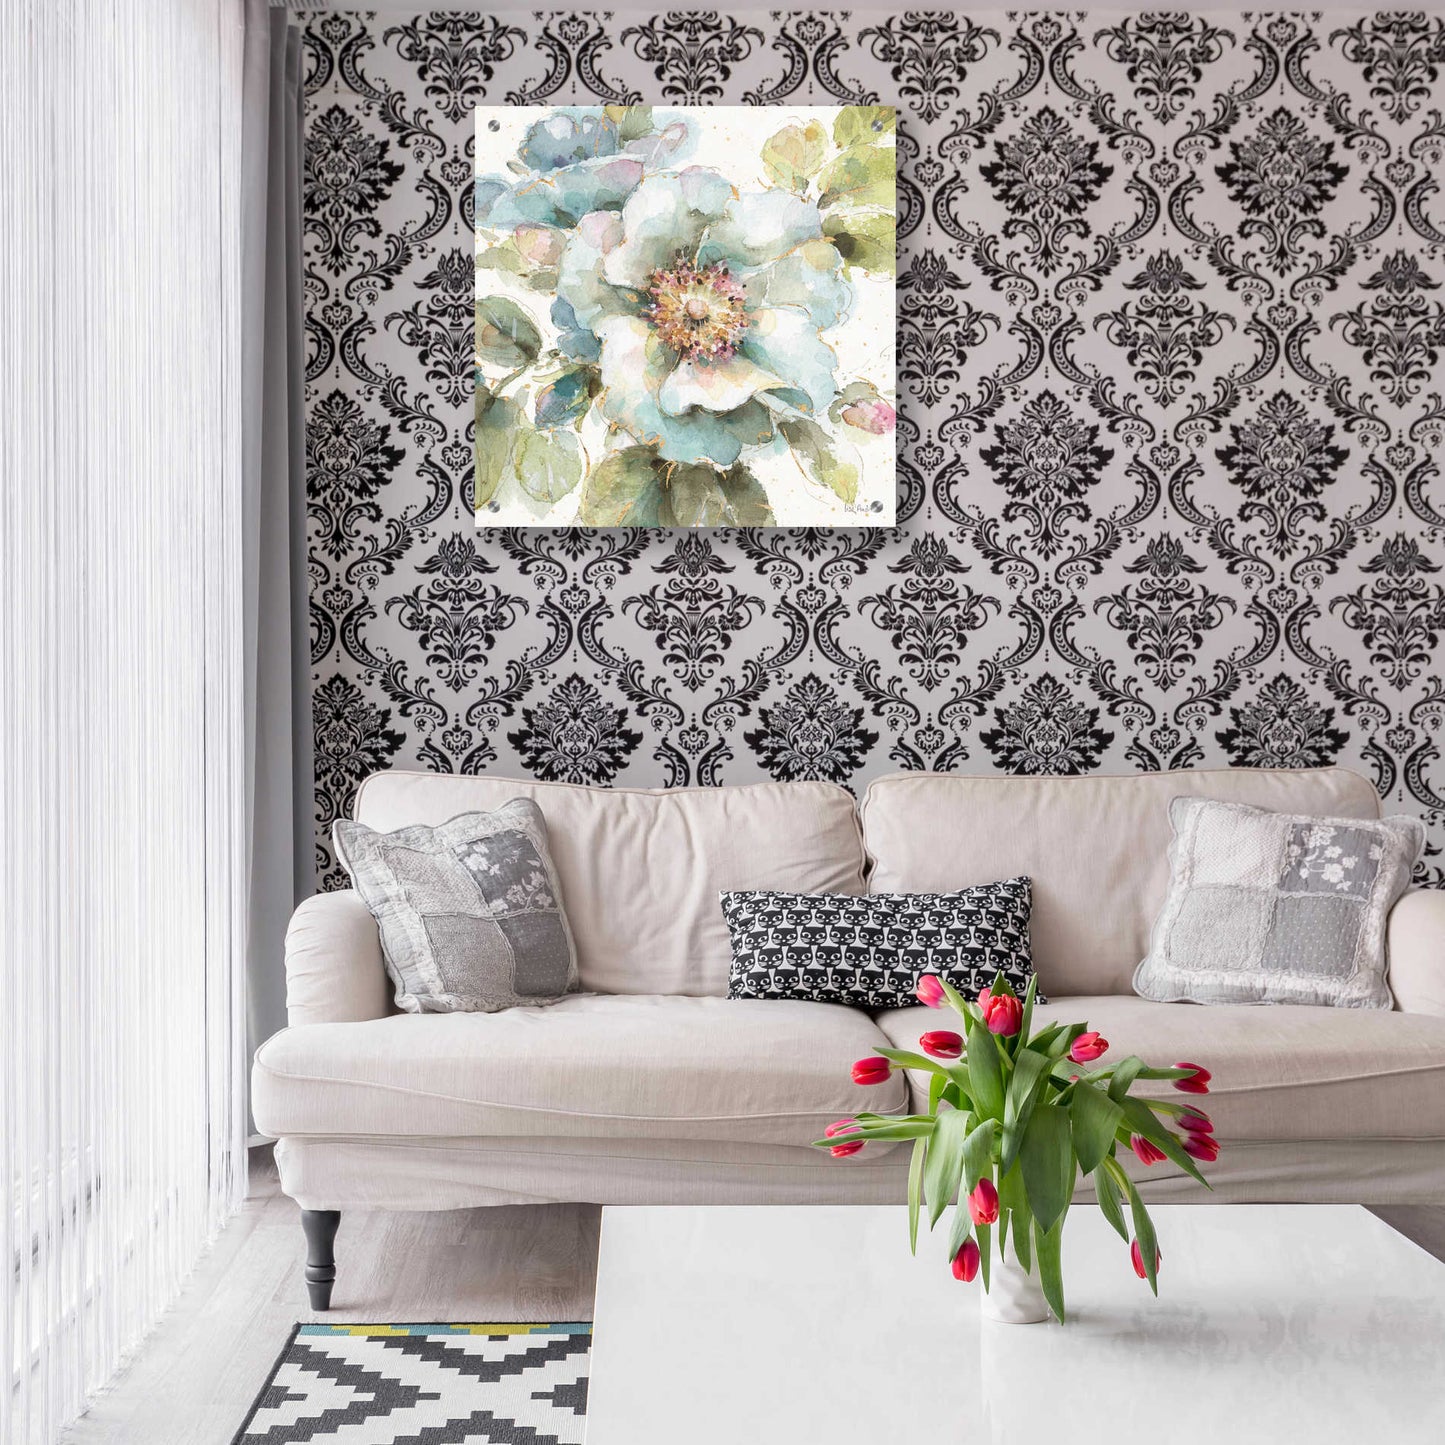 Epic Art 'Country Bloom VII' by Lisa Audit, Acrylic Glass Wall Art,24x24